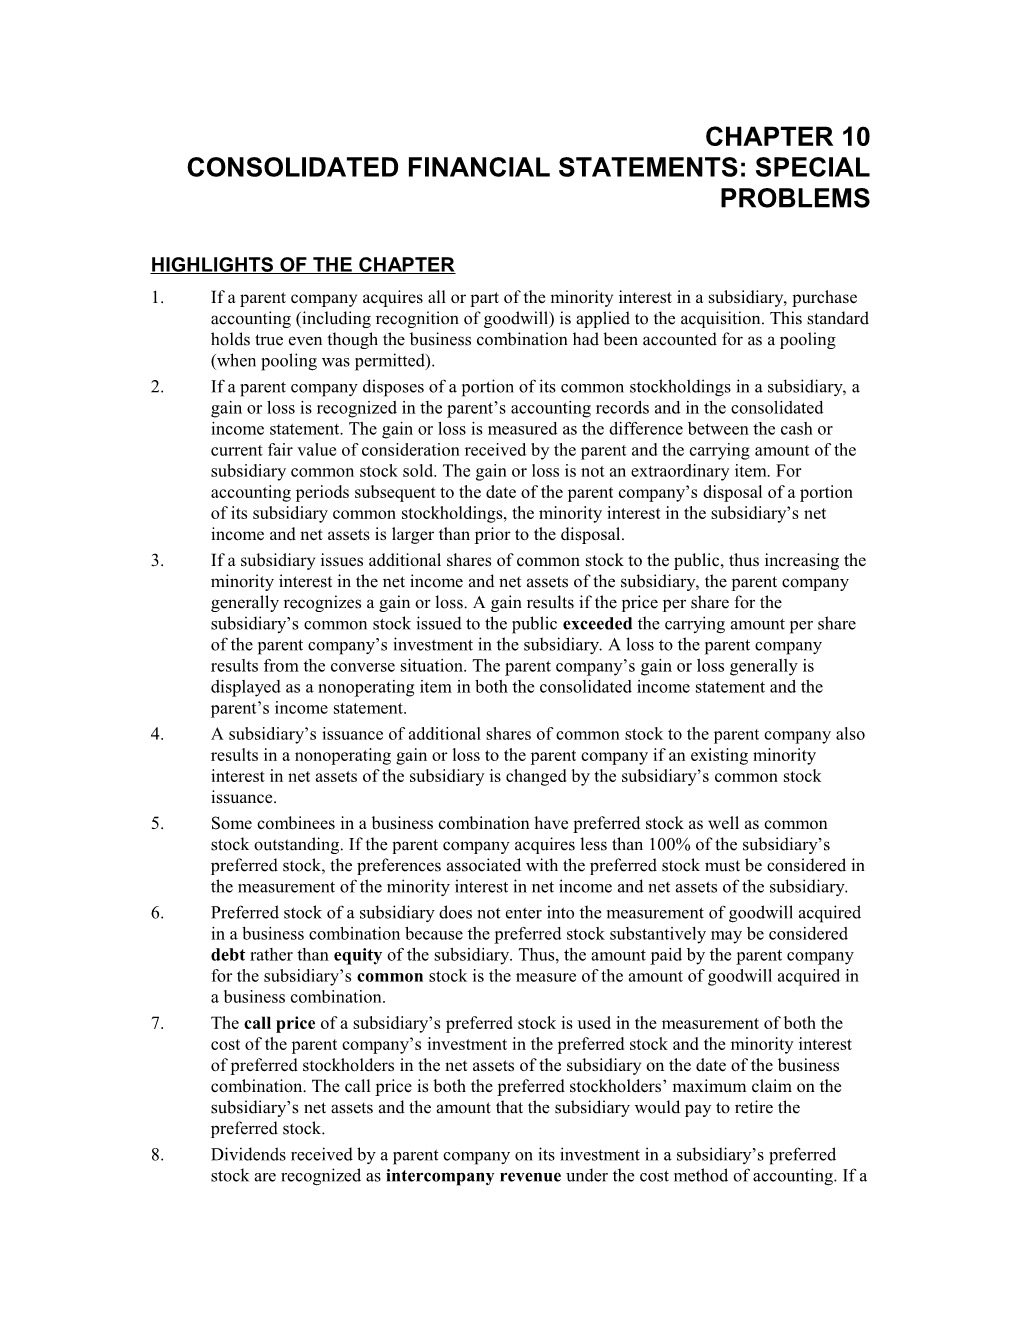 Consolidated Financial Statements: Special Problems